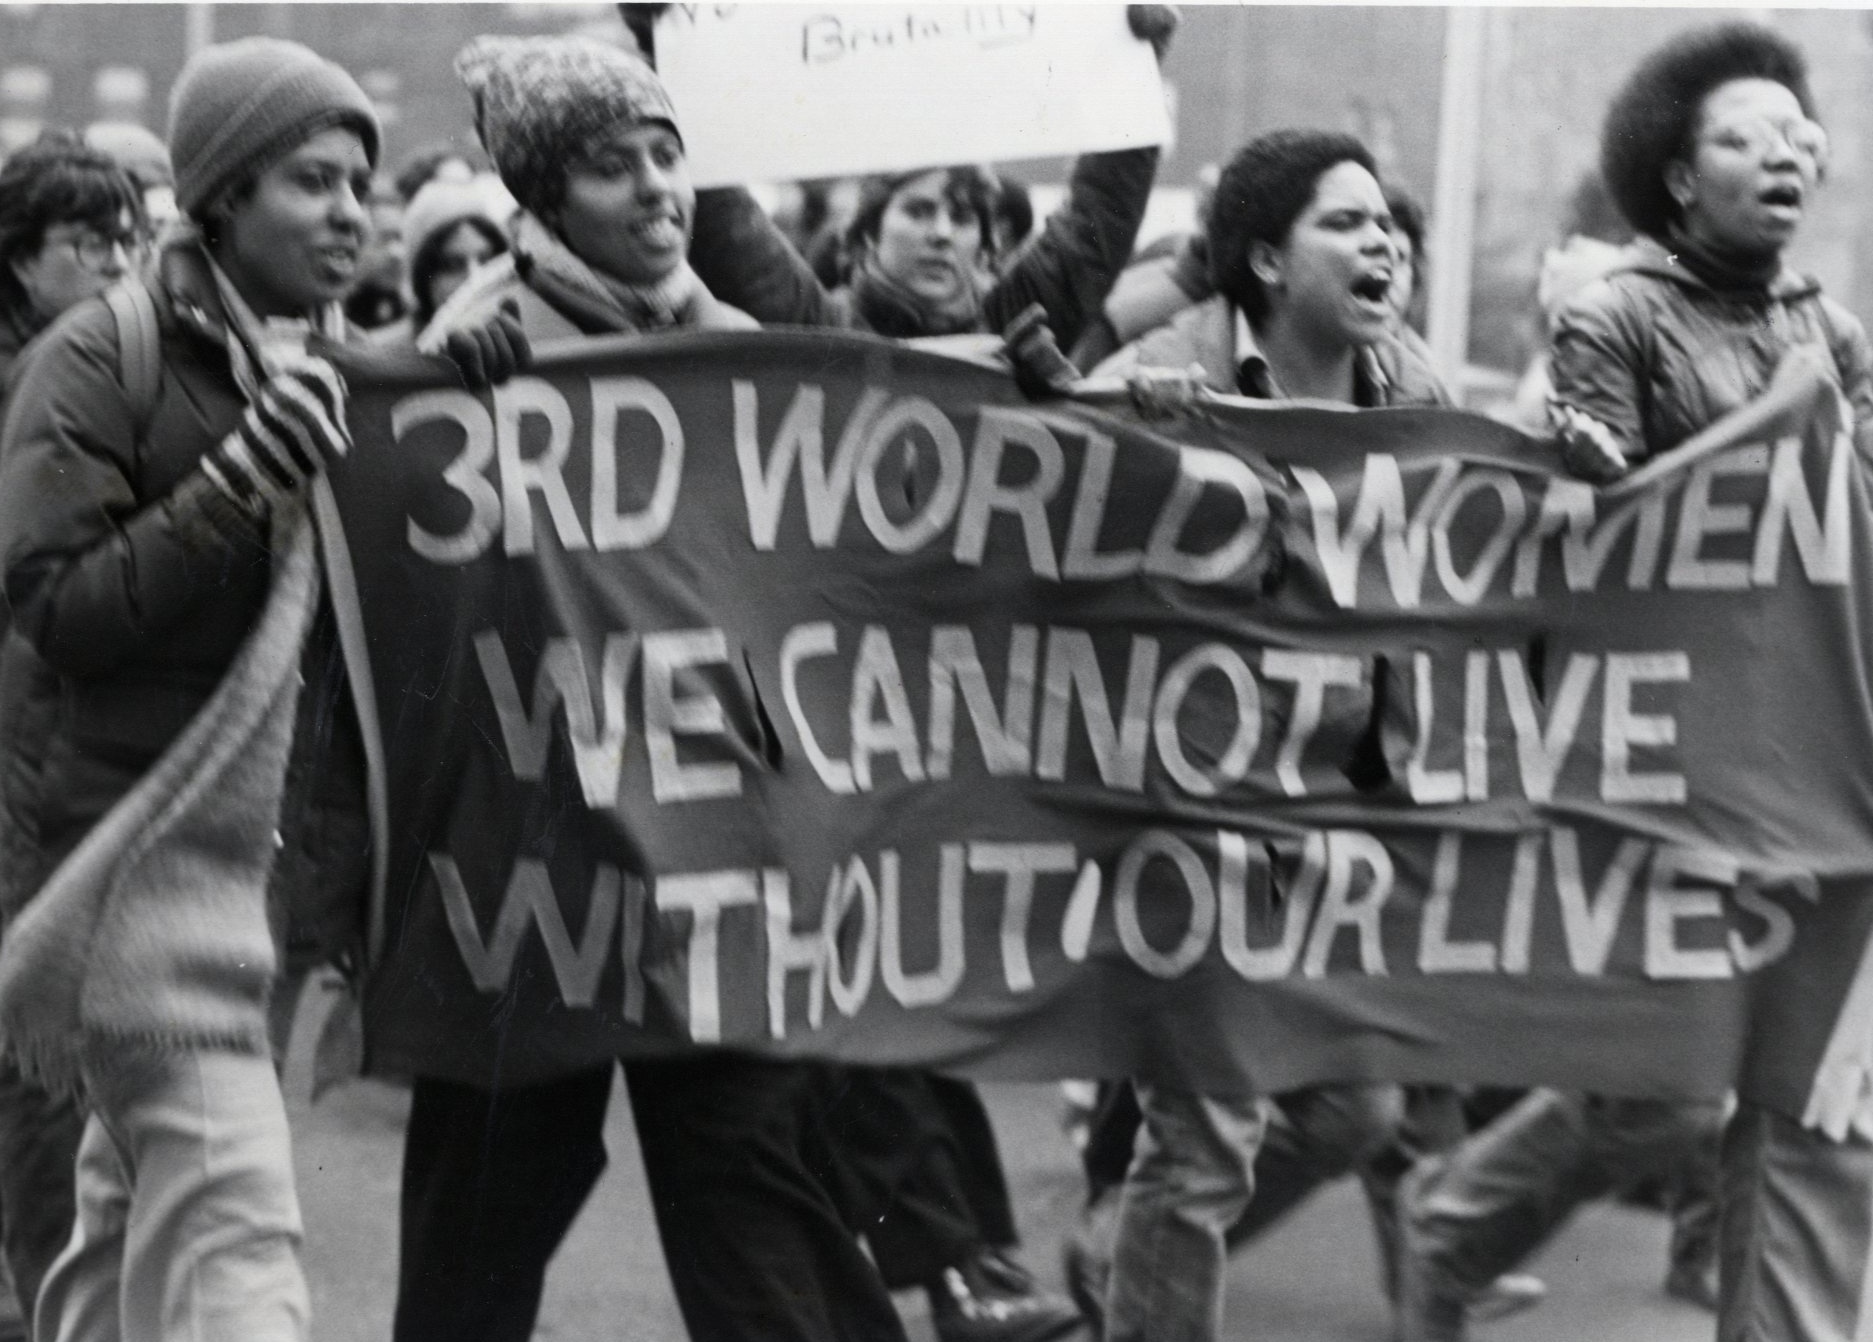 Members of Combahee River Collective at the March and Rally for Bellana Borde against Police Brutality (Boston, January 15, 1980), Photograph by Susan Fleischmann